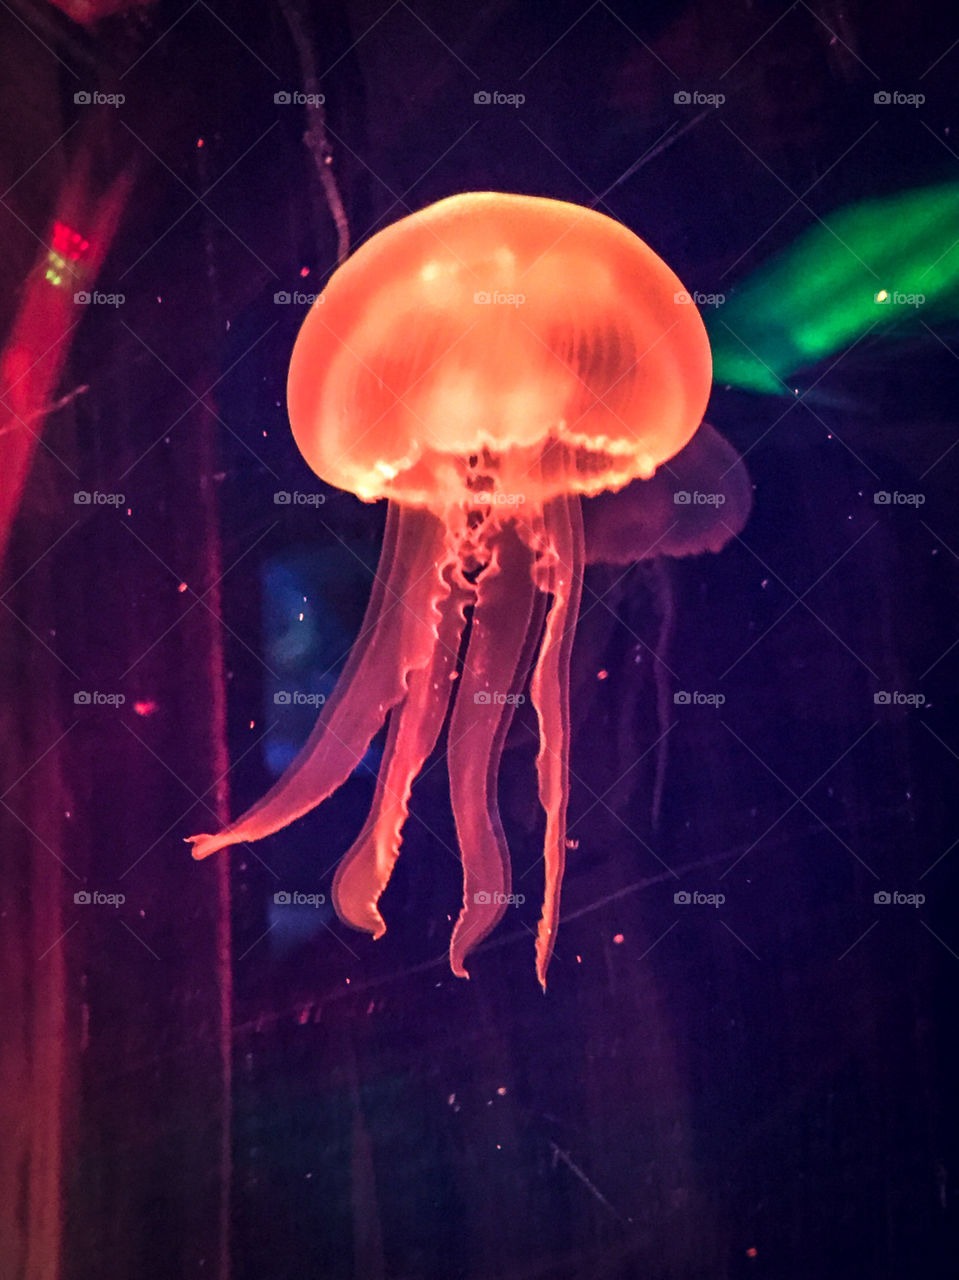 A jellyfish glowing orange from the lighting in an aquarium.